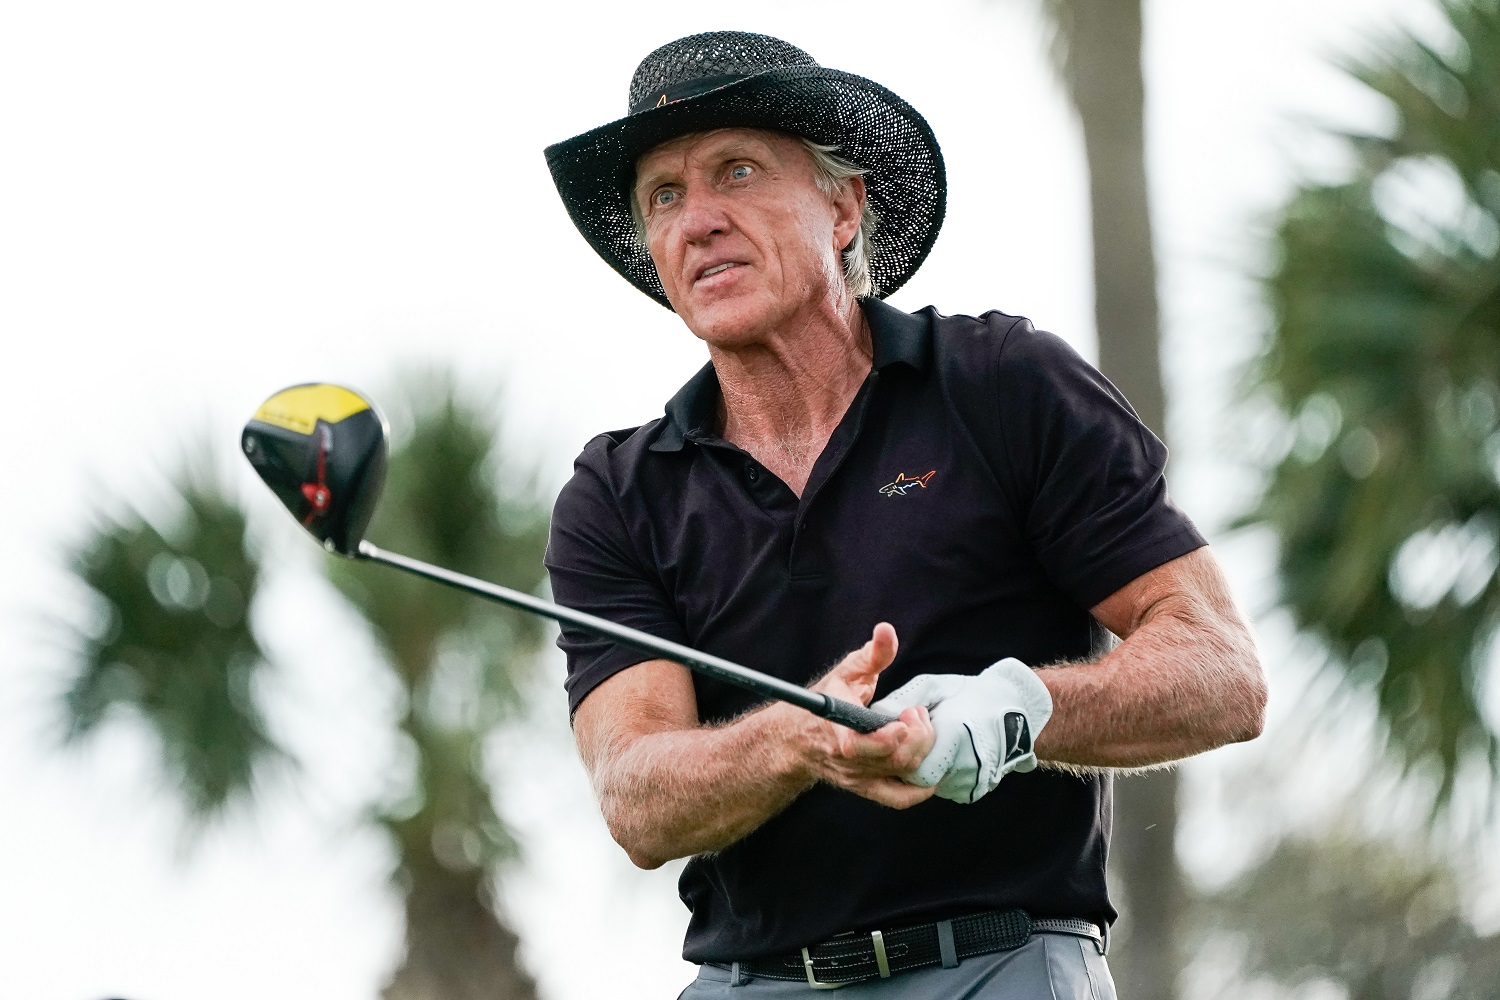 Greg Norman tees off during the Honda Classic Pro-Am at PGA National Champion course on Feb. 27, 2019, in Palm Beach Gardens, Florida.